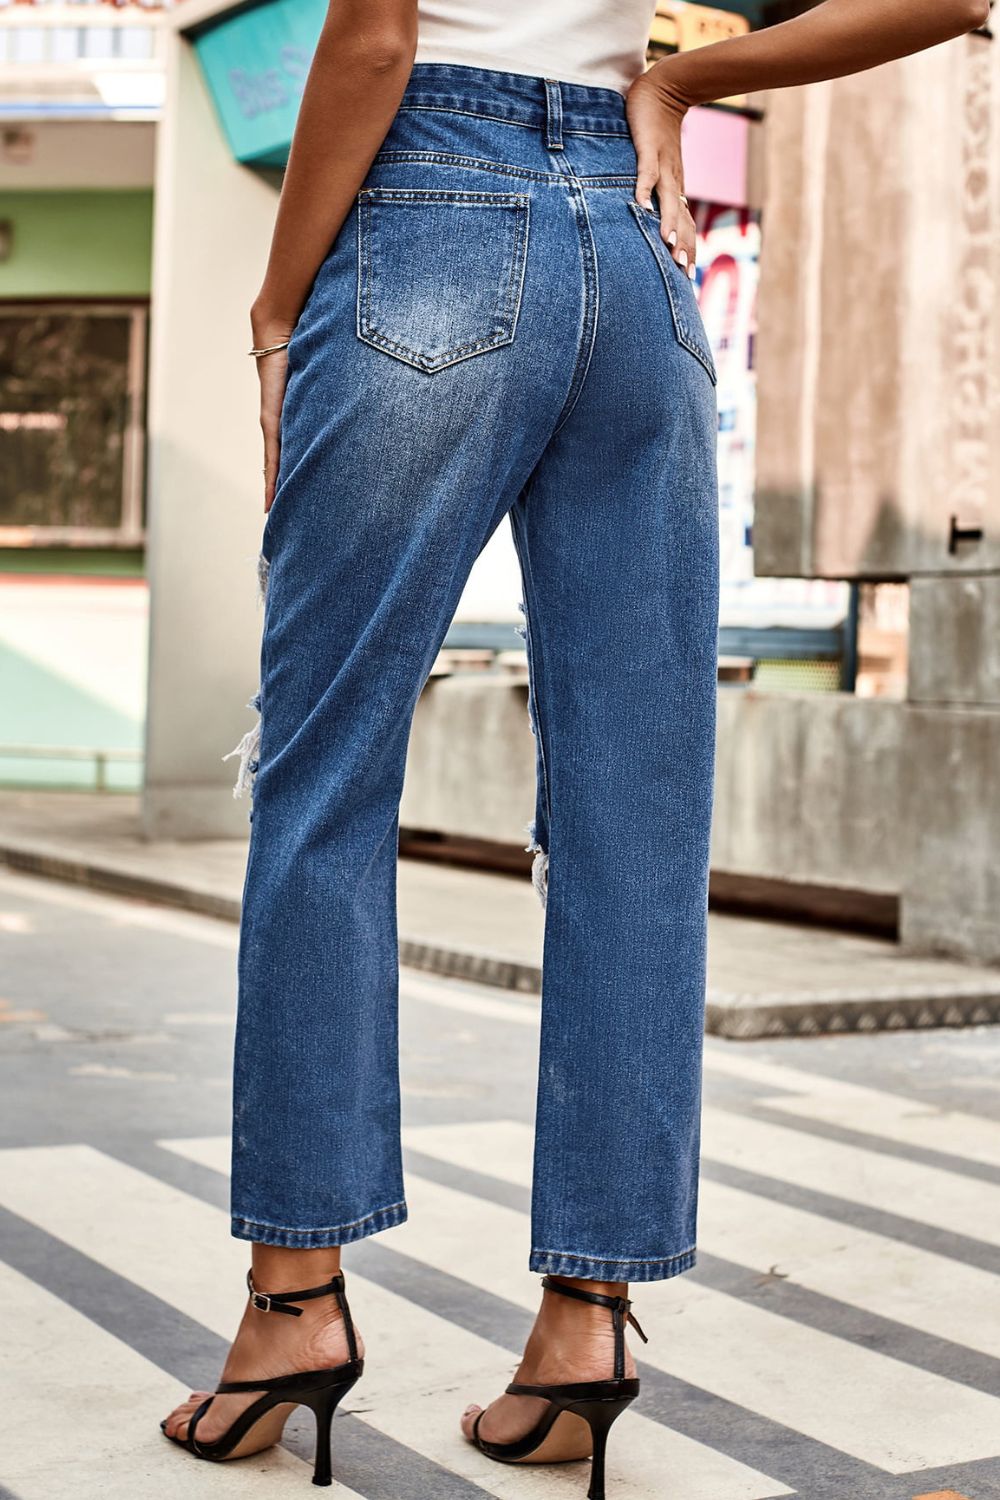 Distressed Buttoned Jeans with Pockets - bertofonsi